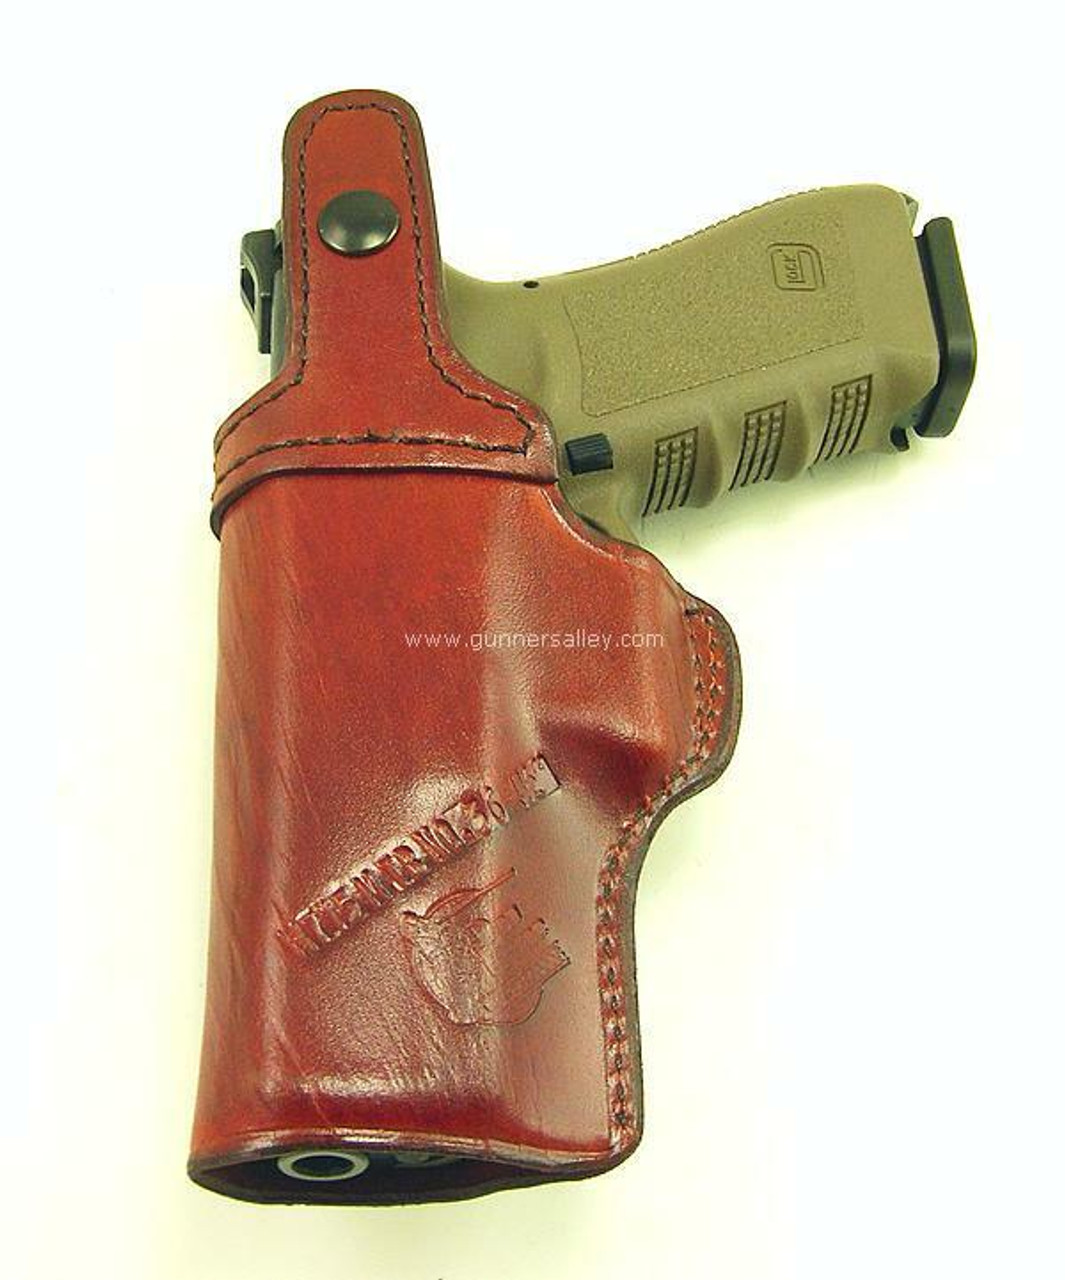 Saddle Brown - Rear View - Right Hand - Shown with a Glock 17 for Demonstration Purposes